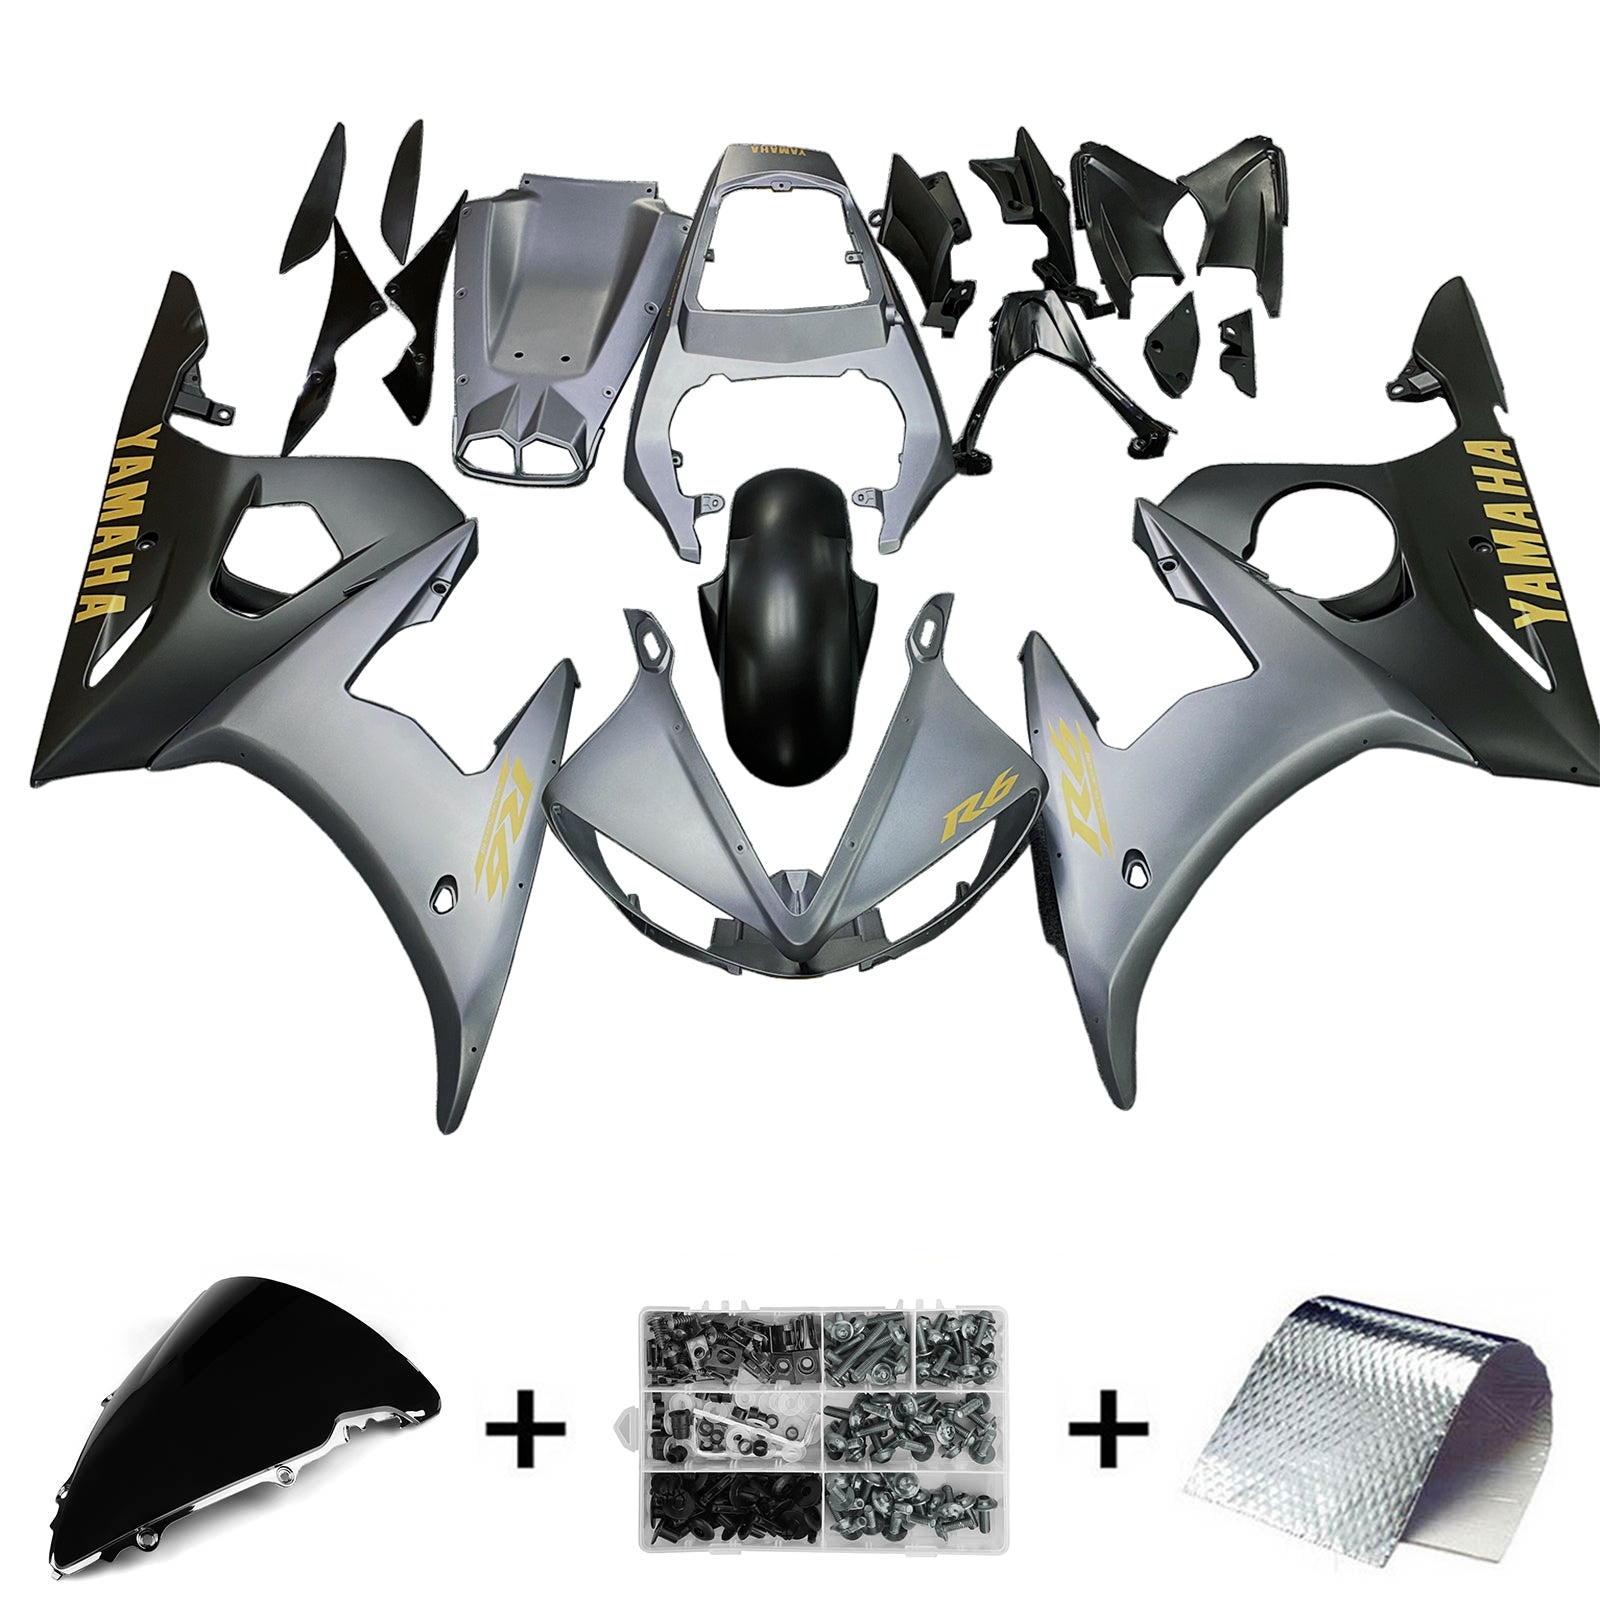 Injection Fairing Kit Bodywork Plastic ABS fit For Yamaha 2003-2004 YZF 600 R6 & 2006-2009 YZF R6S